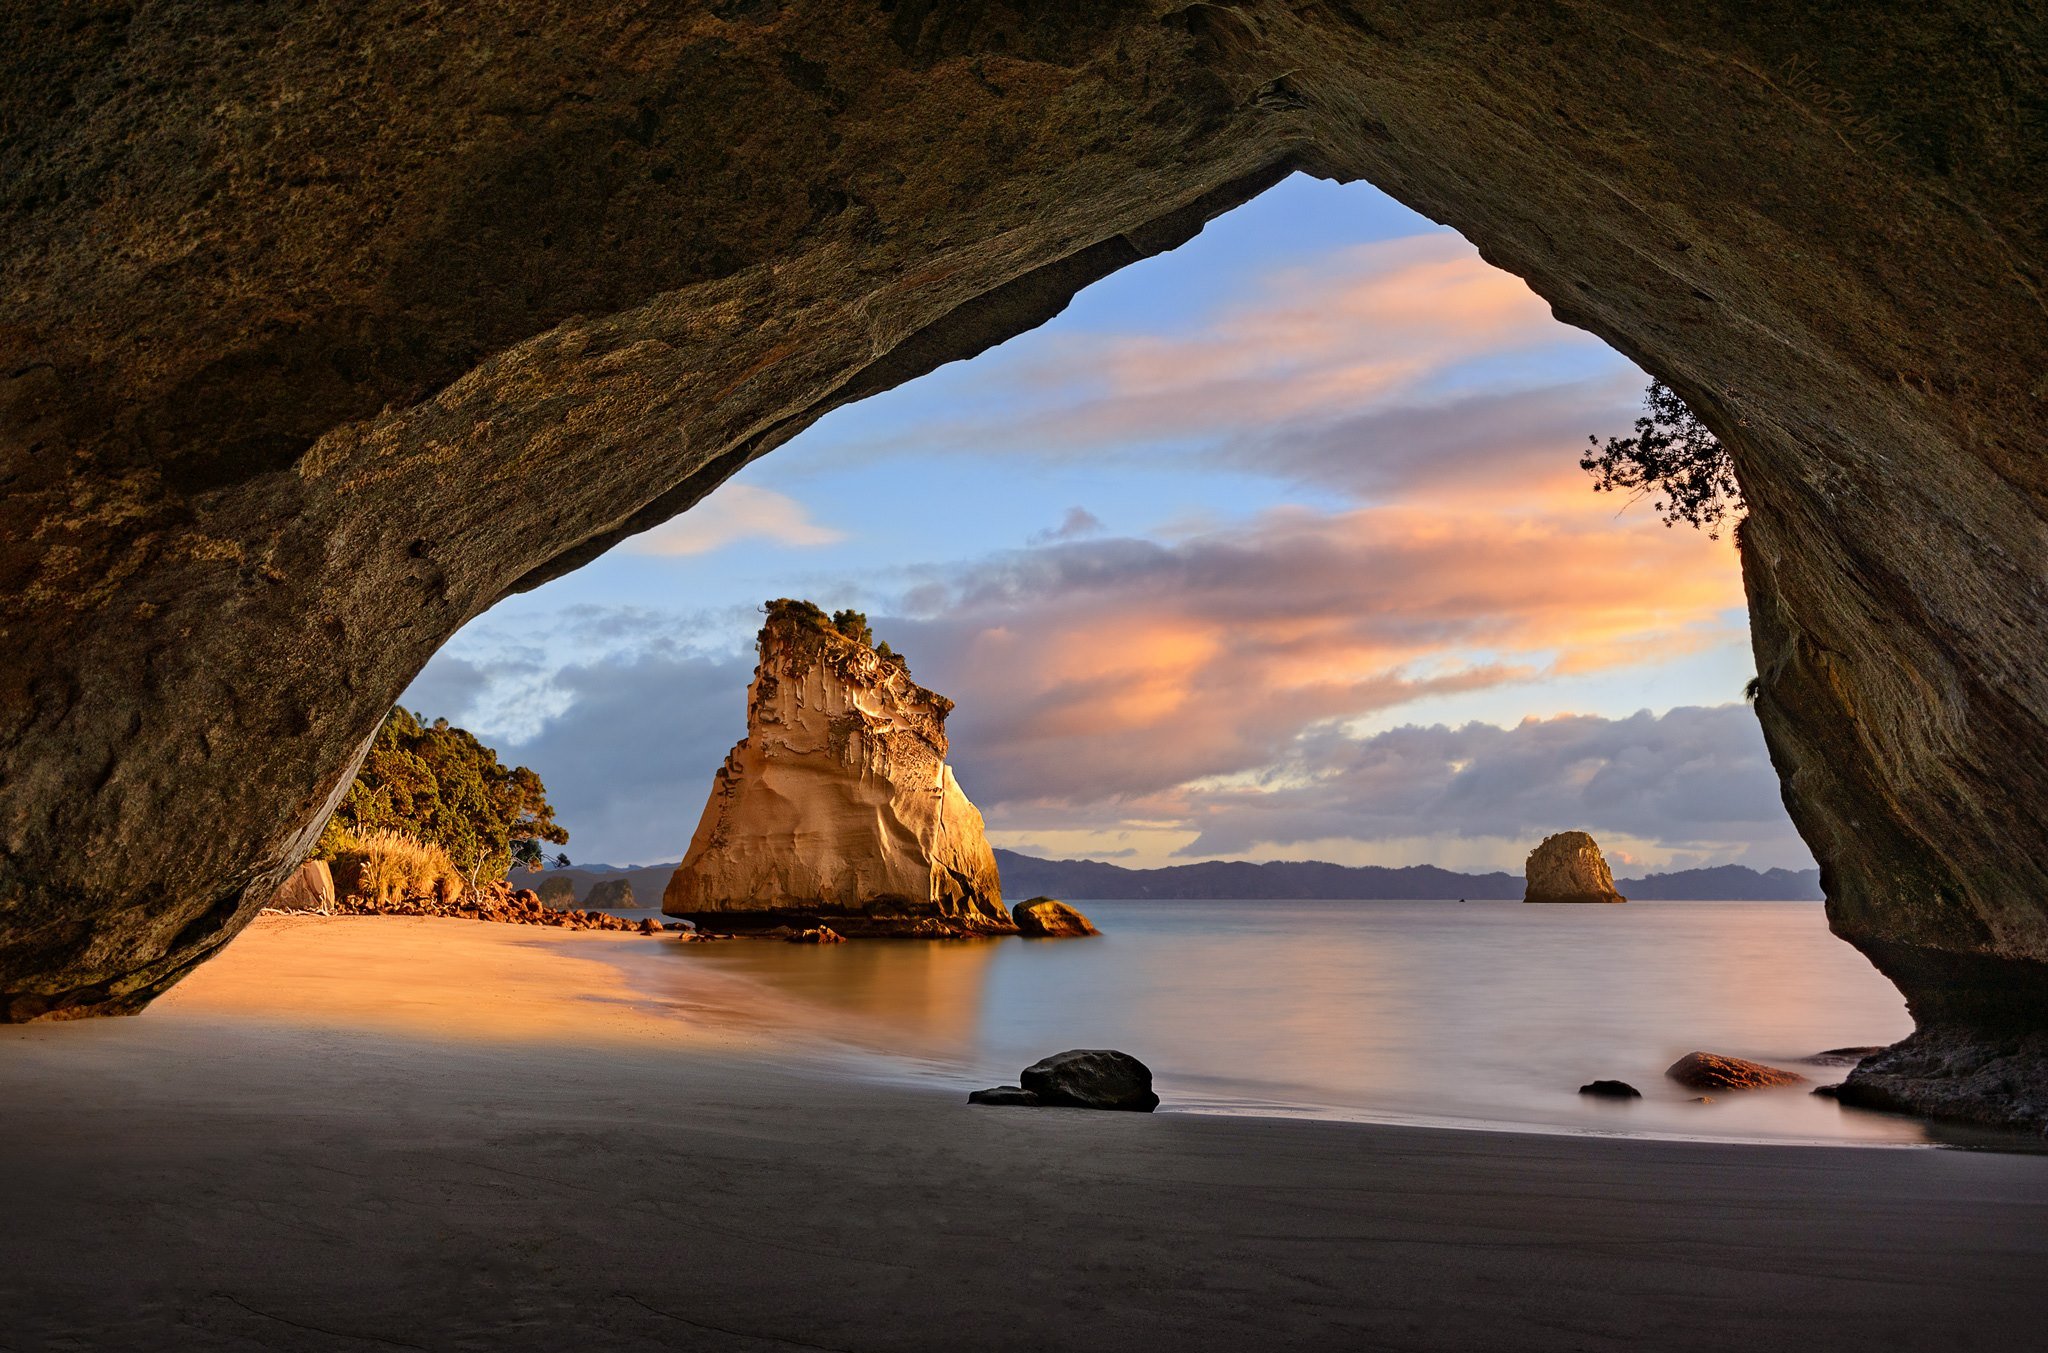 Sunrise at cathedral cove